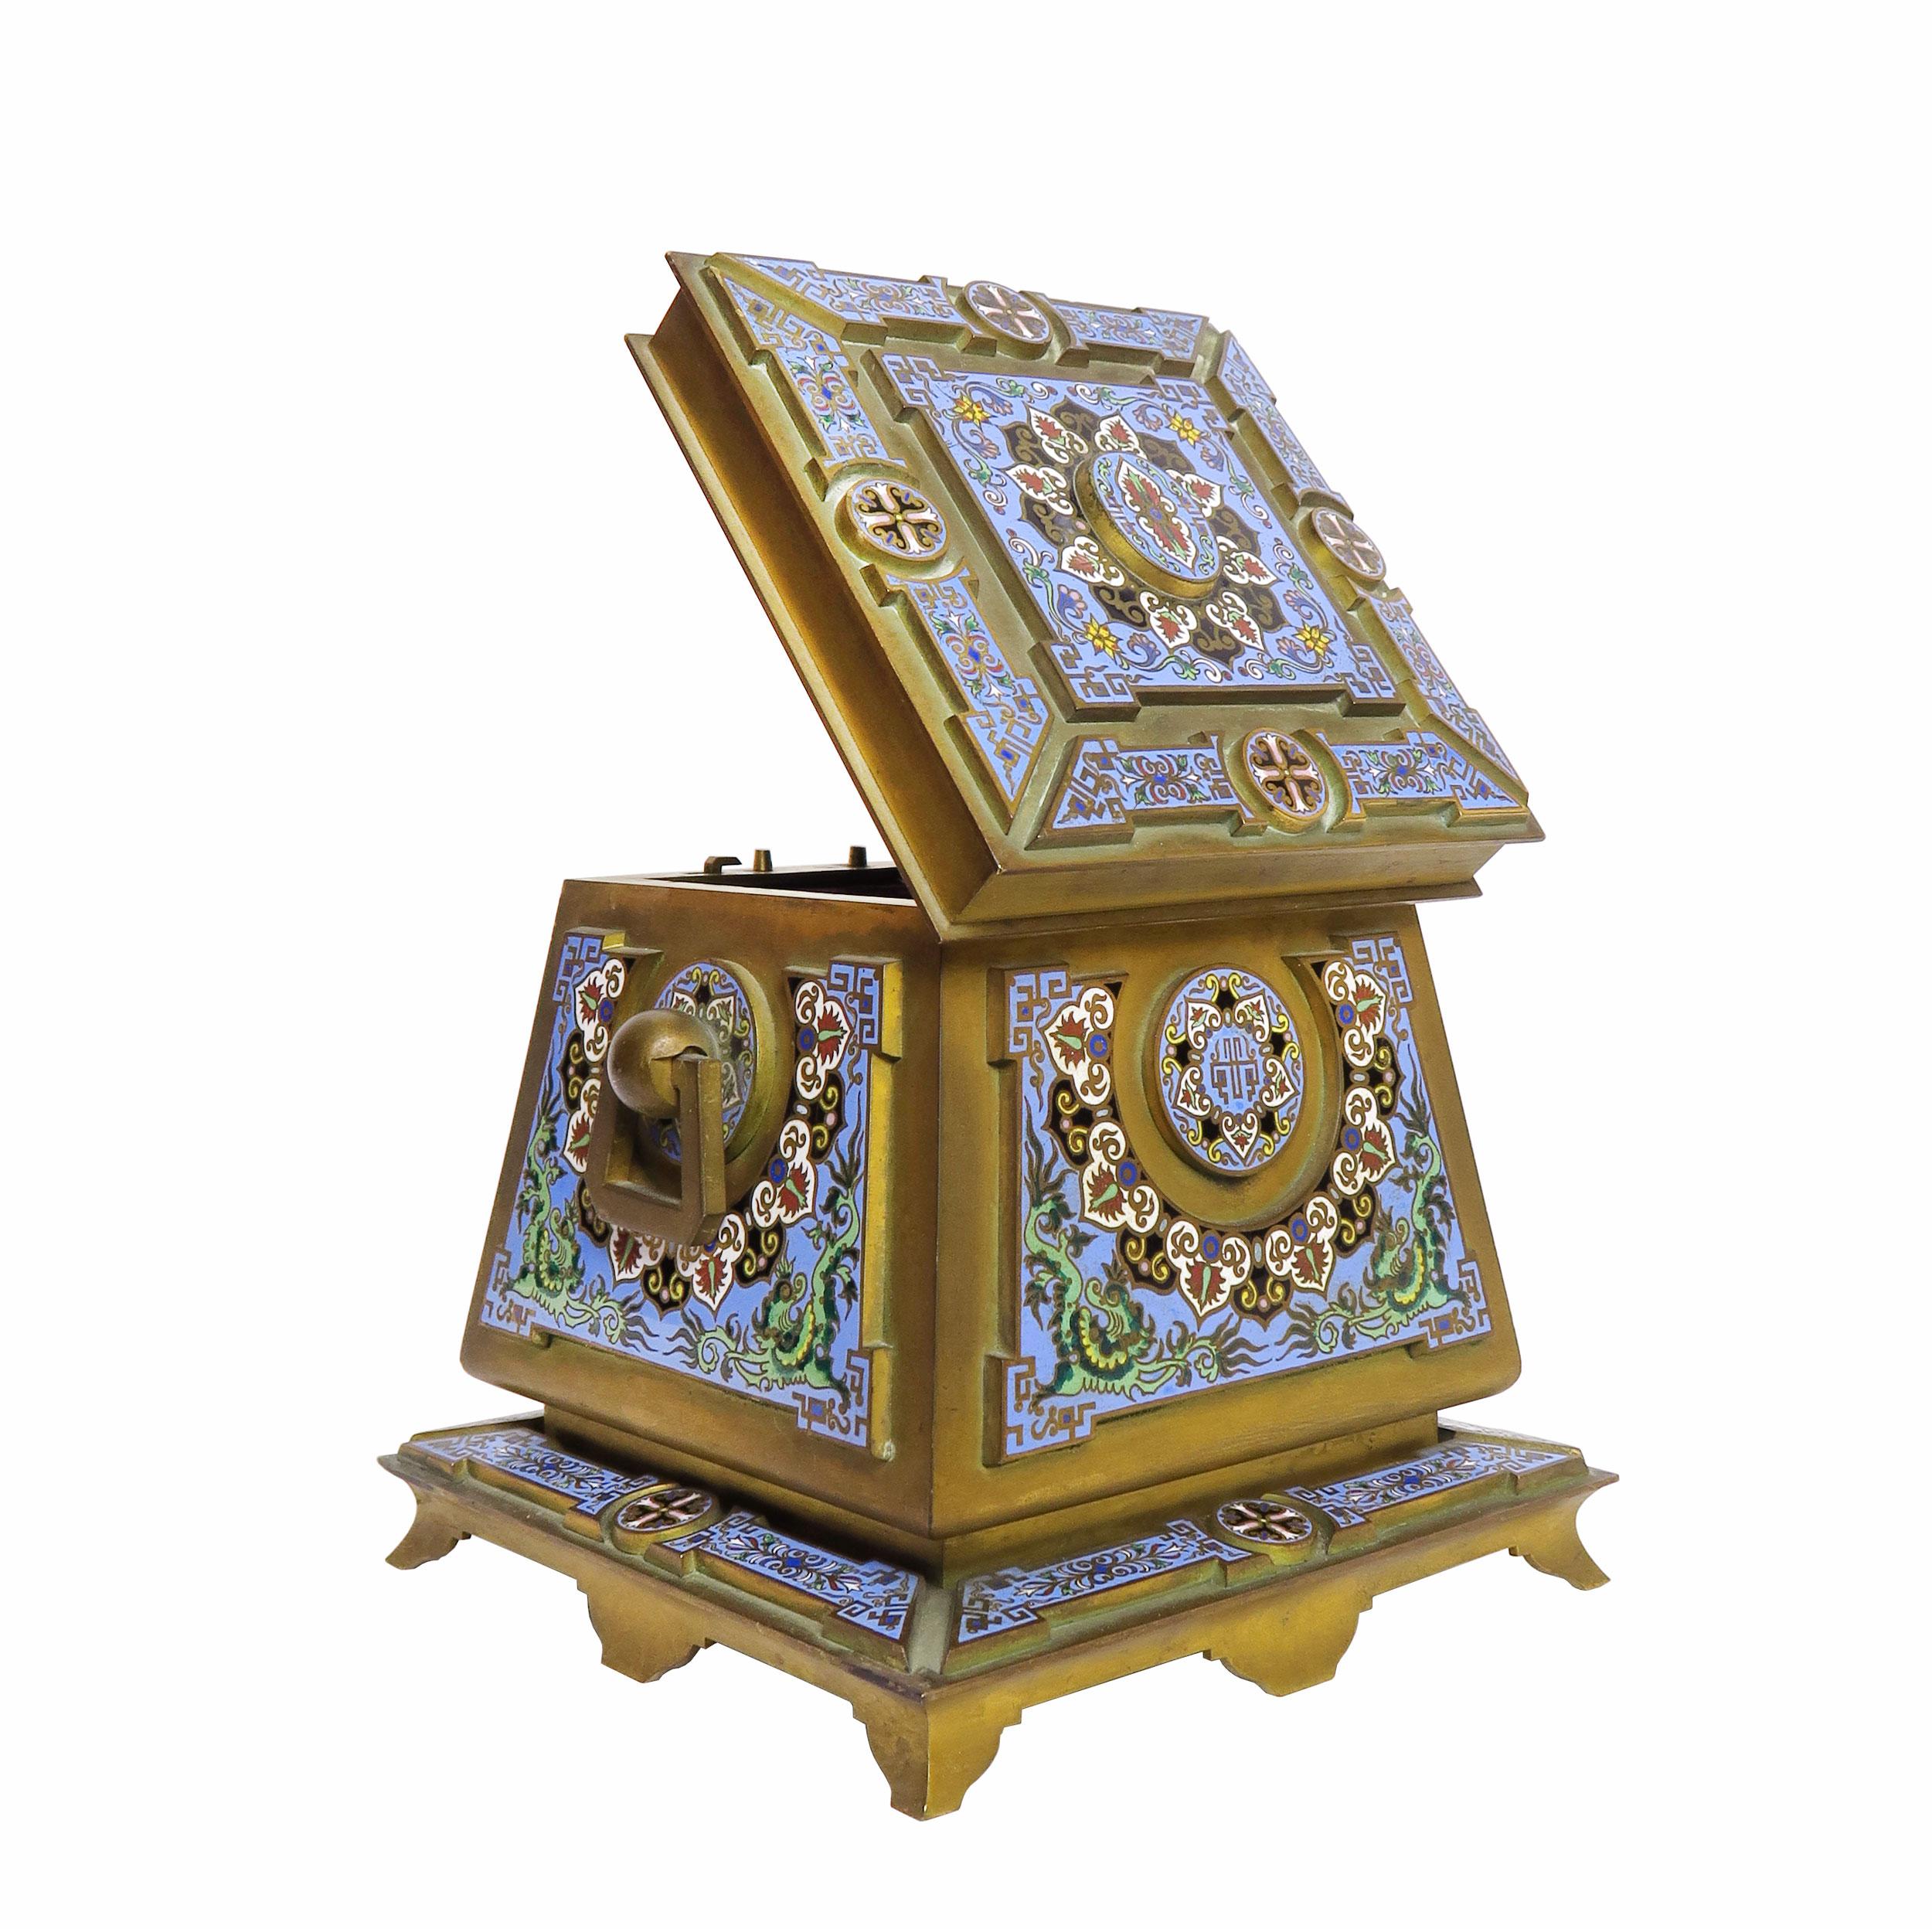 French Gilt-Bronze and Cloisonne Enamel Casket Possibly by Ferdinand Barbedienne 2